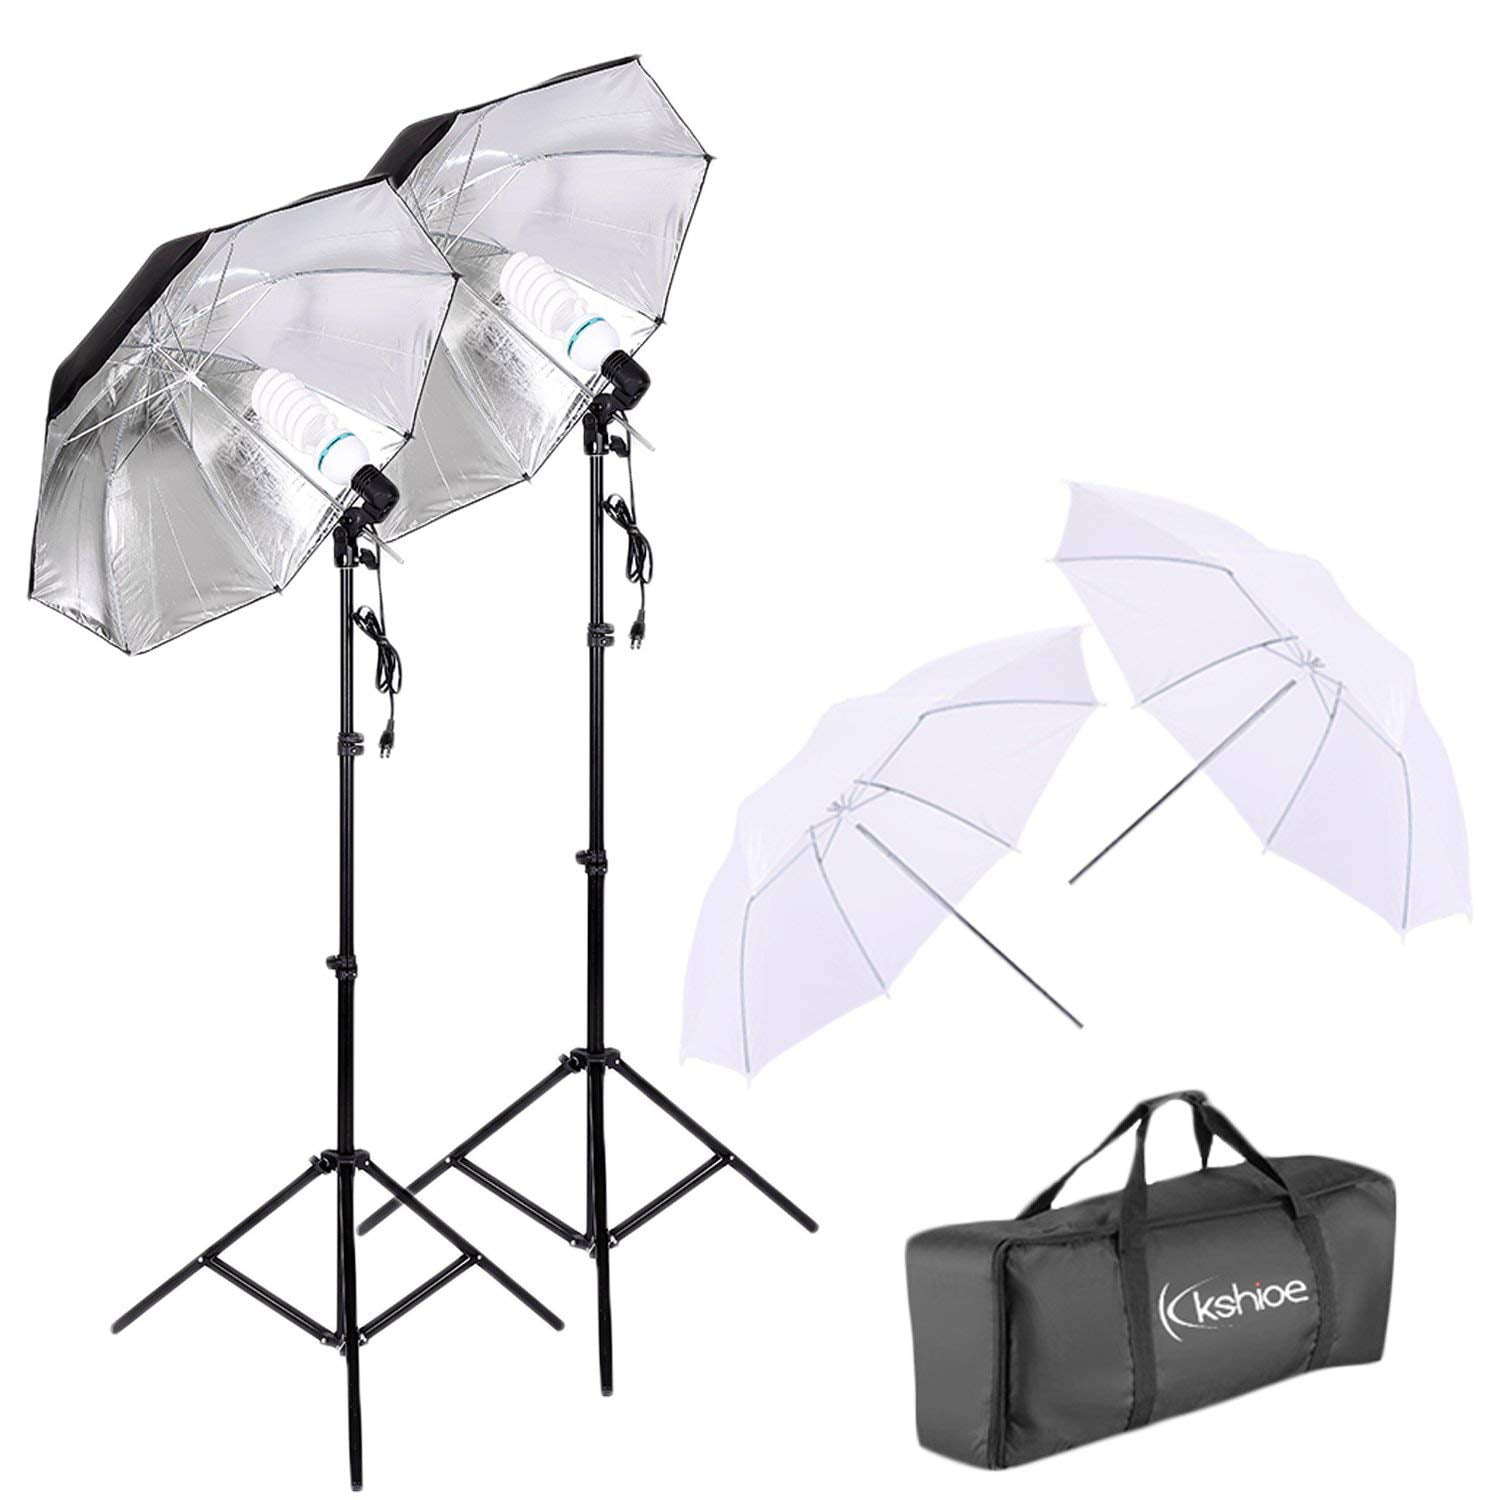 LimoStudio Umbrella Reflector Video Studio Continuous Lighting Kit Light Stand Tripod Carry Bag Photo Bulb and Socket with Umbrella Insert Hole AGG2106 Silver and Gold Umbrella Photograph Studio 